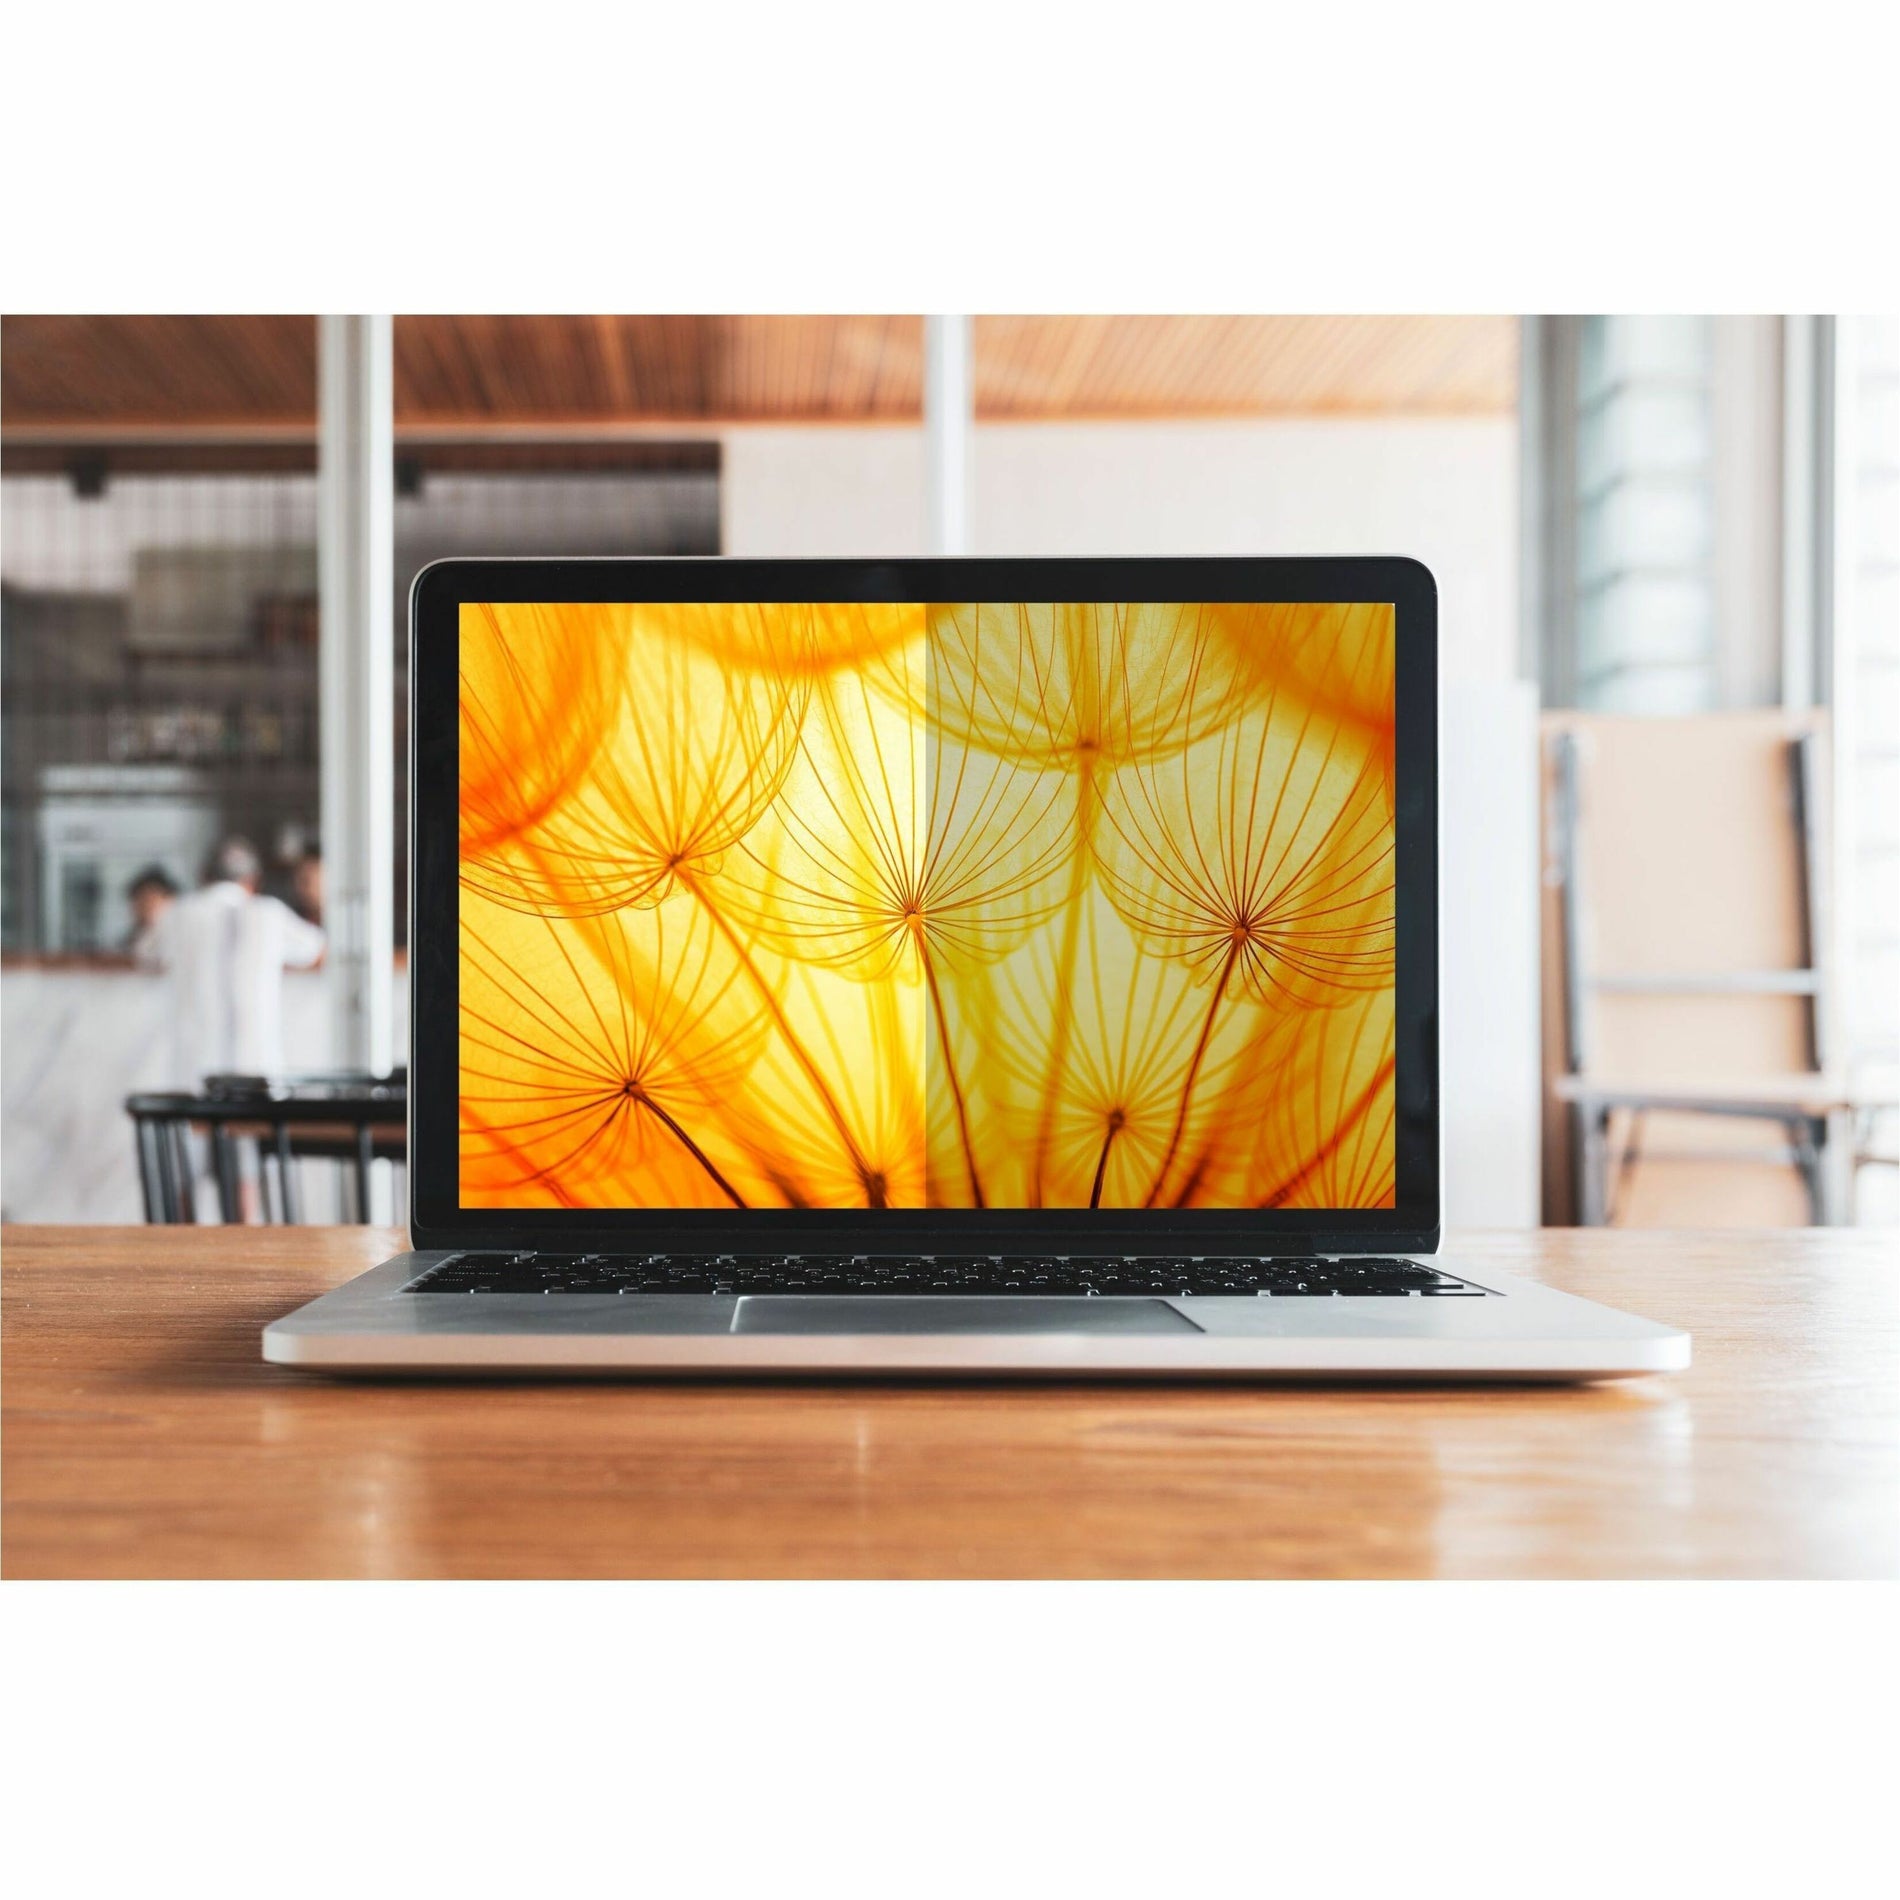 3M BP173W9B Bright Screen Privacy Filter for 17.3in Laptop, 16:9, Reversible Matte-to-Glossy, Limited Viewing Angle, Easy to Apply, Blue Light Reduction